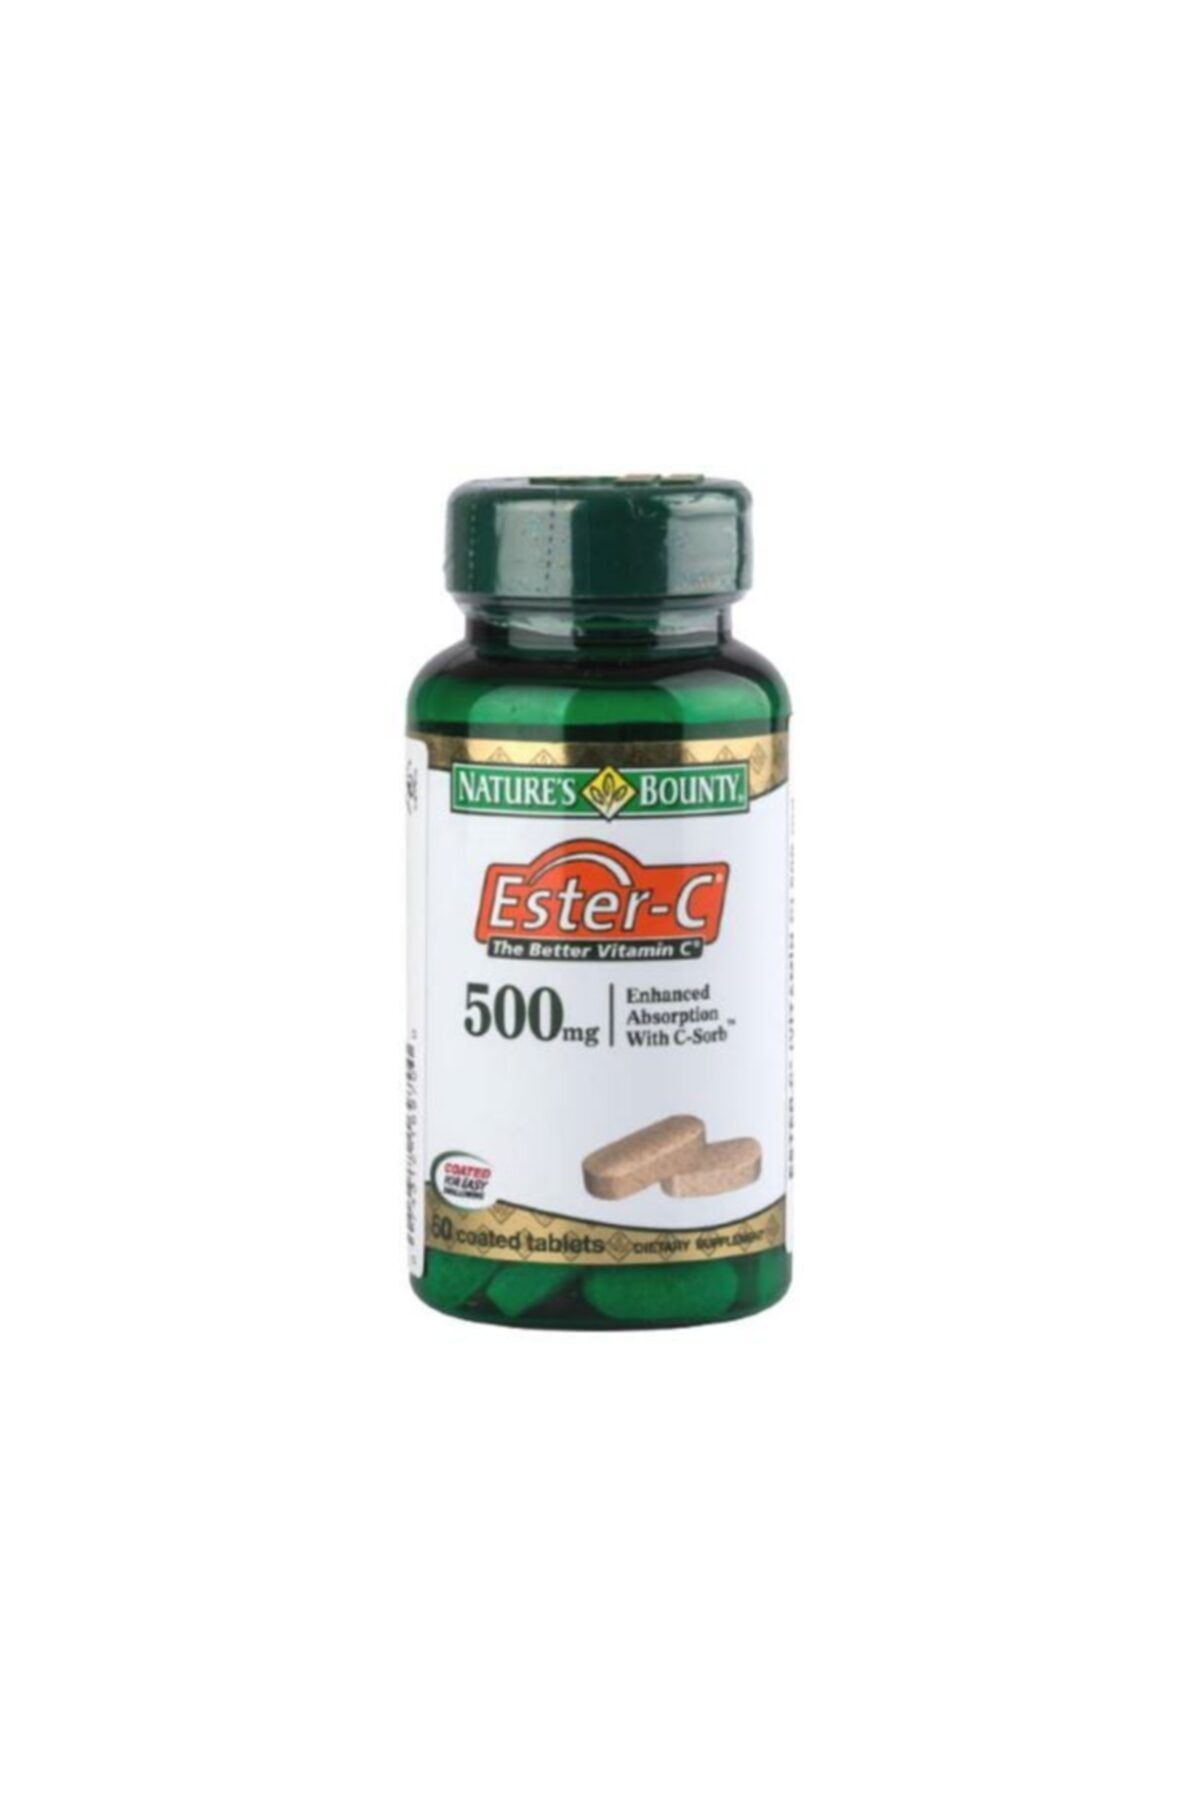 Natures Bounty Bounty Ester-c 500mg 60 Tablet